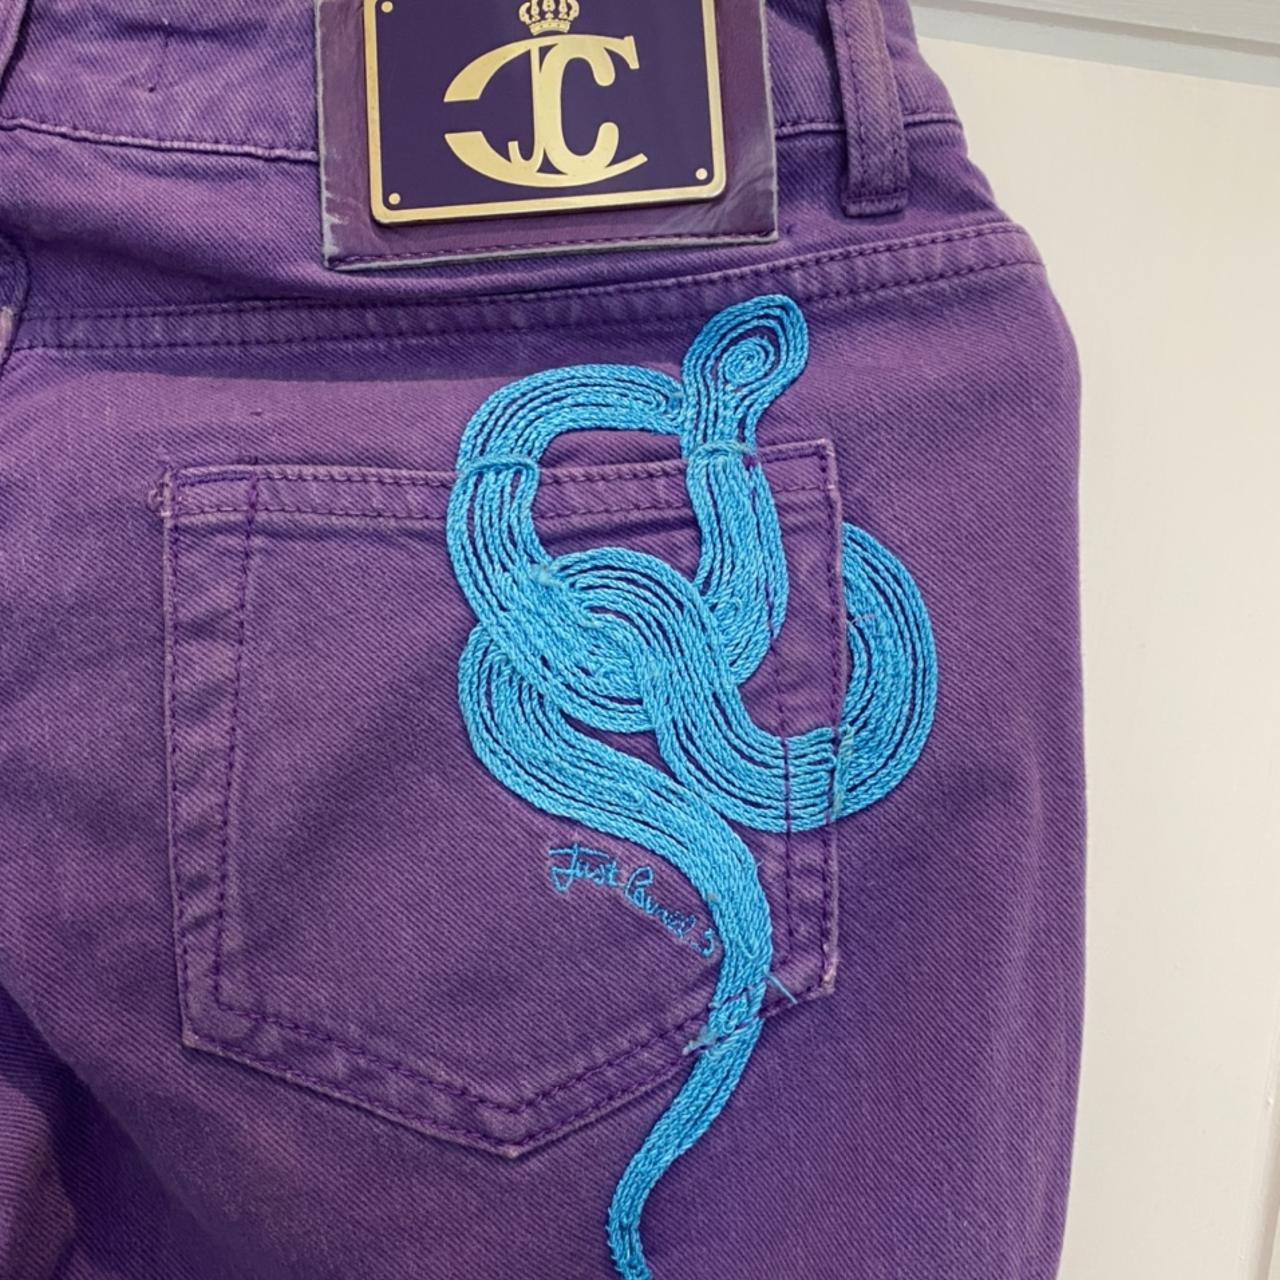 Just Cavalli purple jeans with turquoise embroidery - Depop